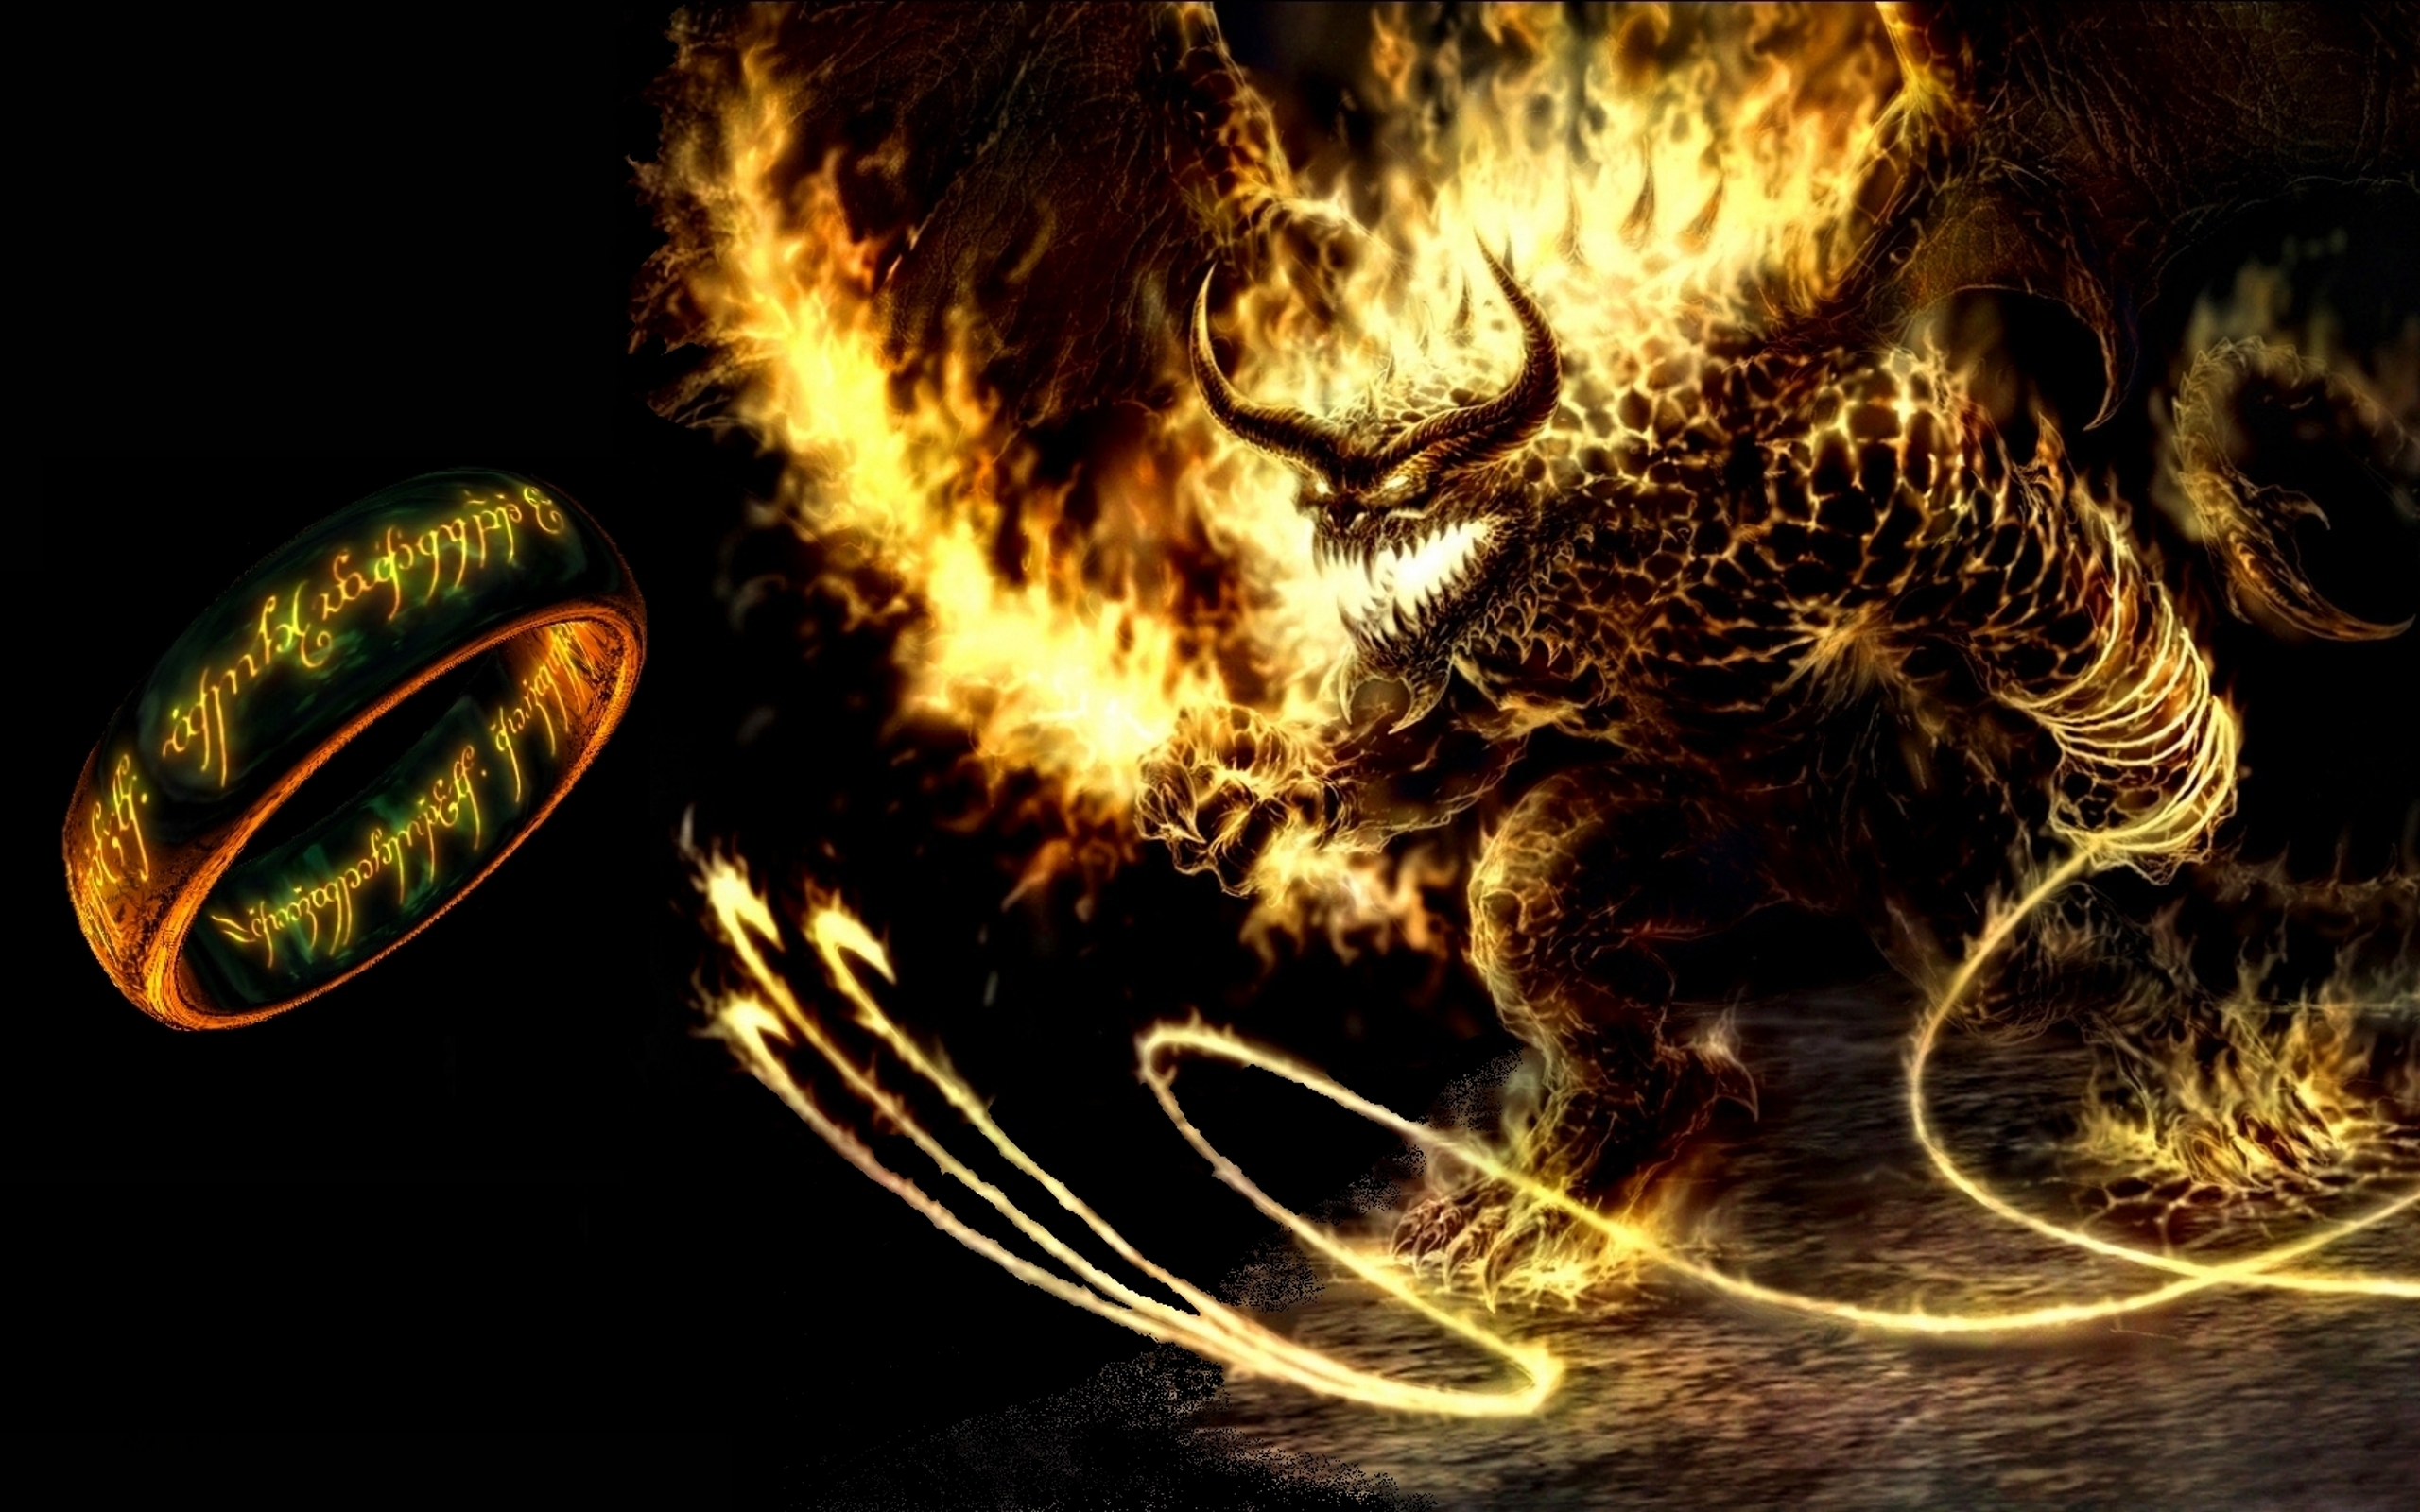 Balrog   Lord of the Rings Wallpaper 4801031 2560x1600